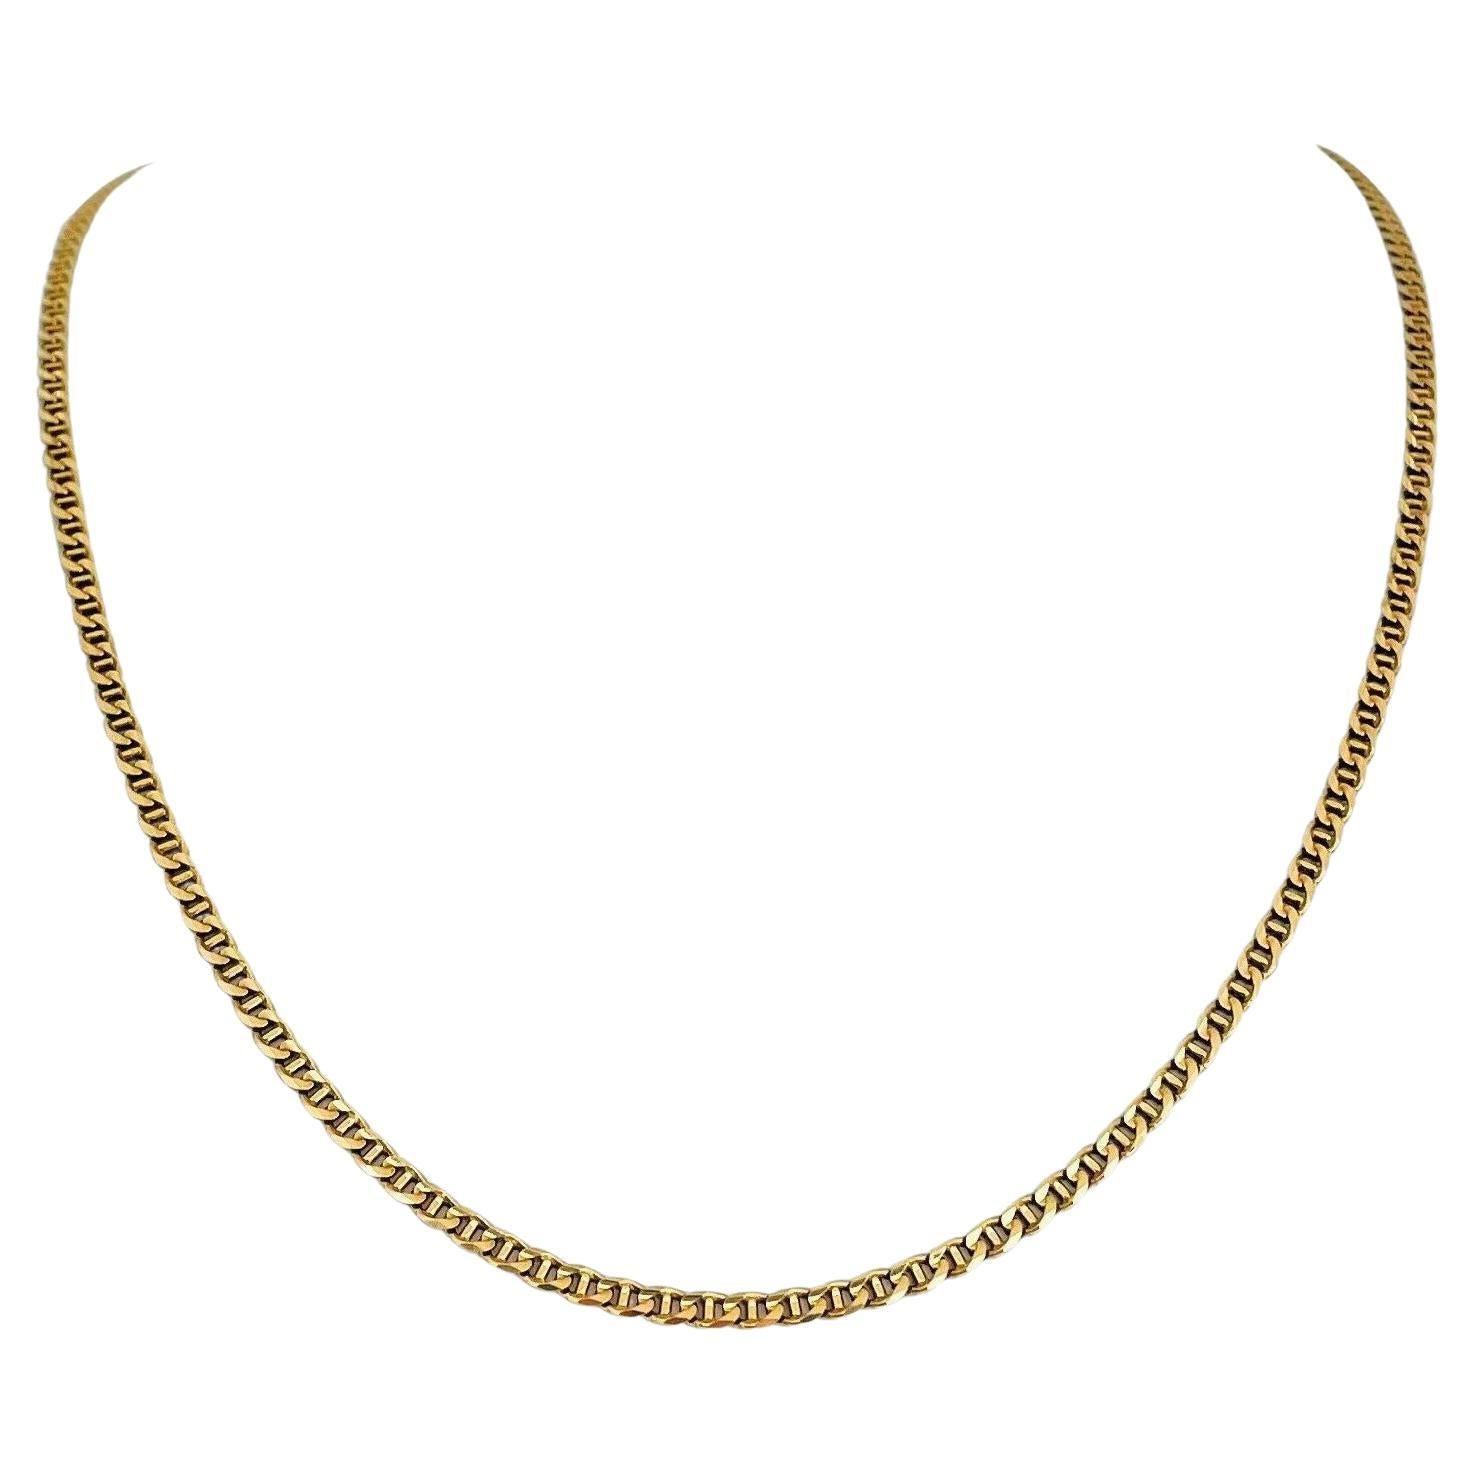 18 Karat Yellow Gold Solid Thin Mariner Gucci Link Chain Necklace, Italy